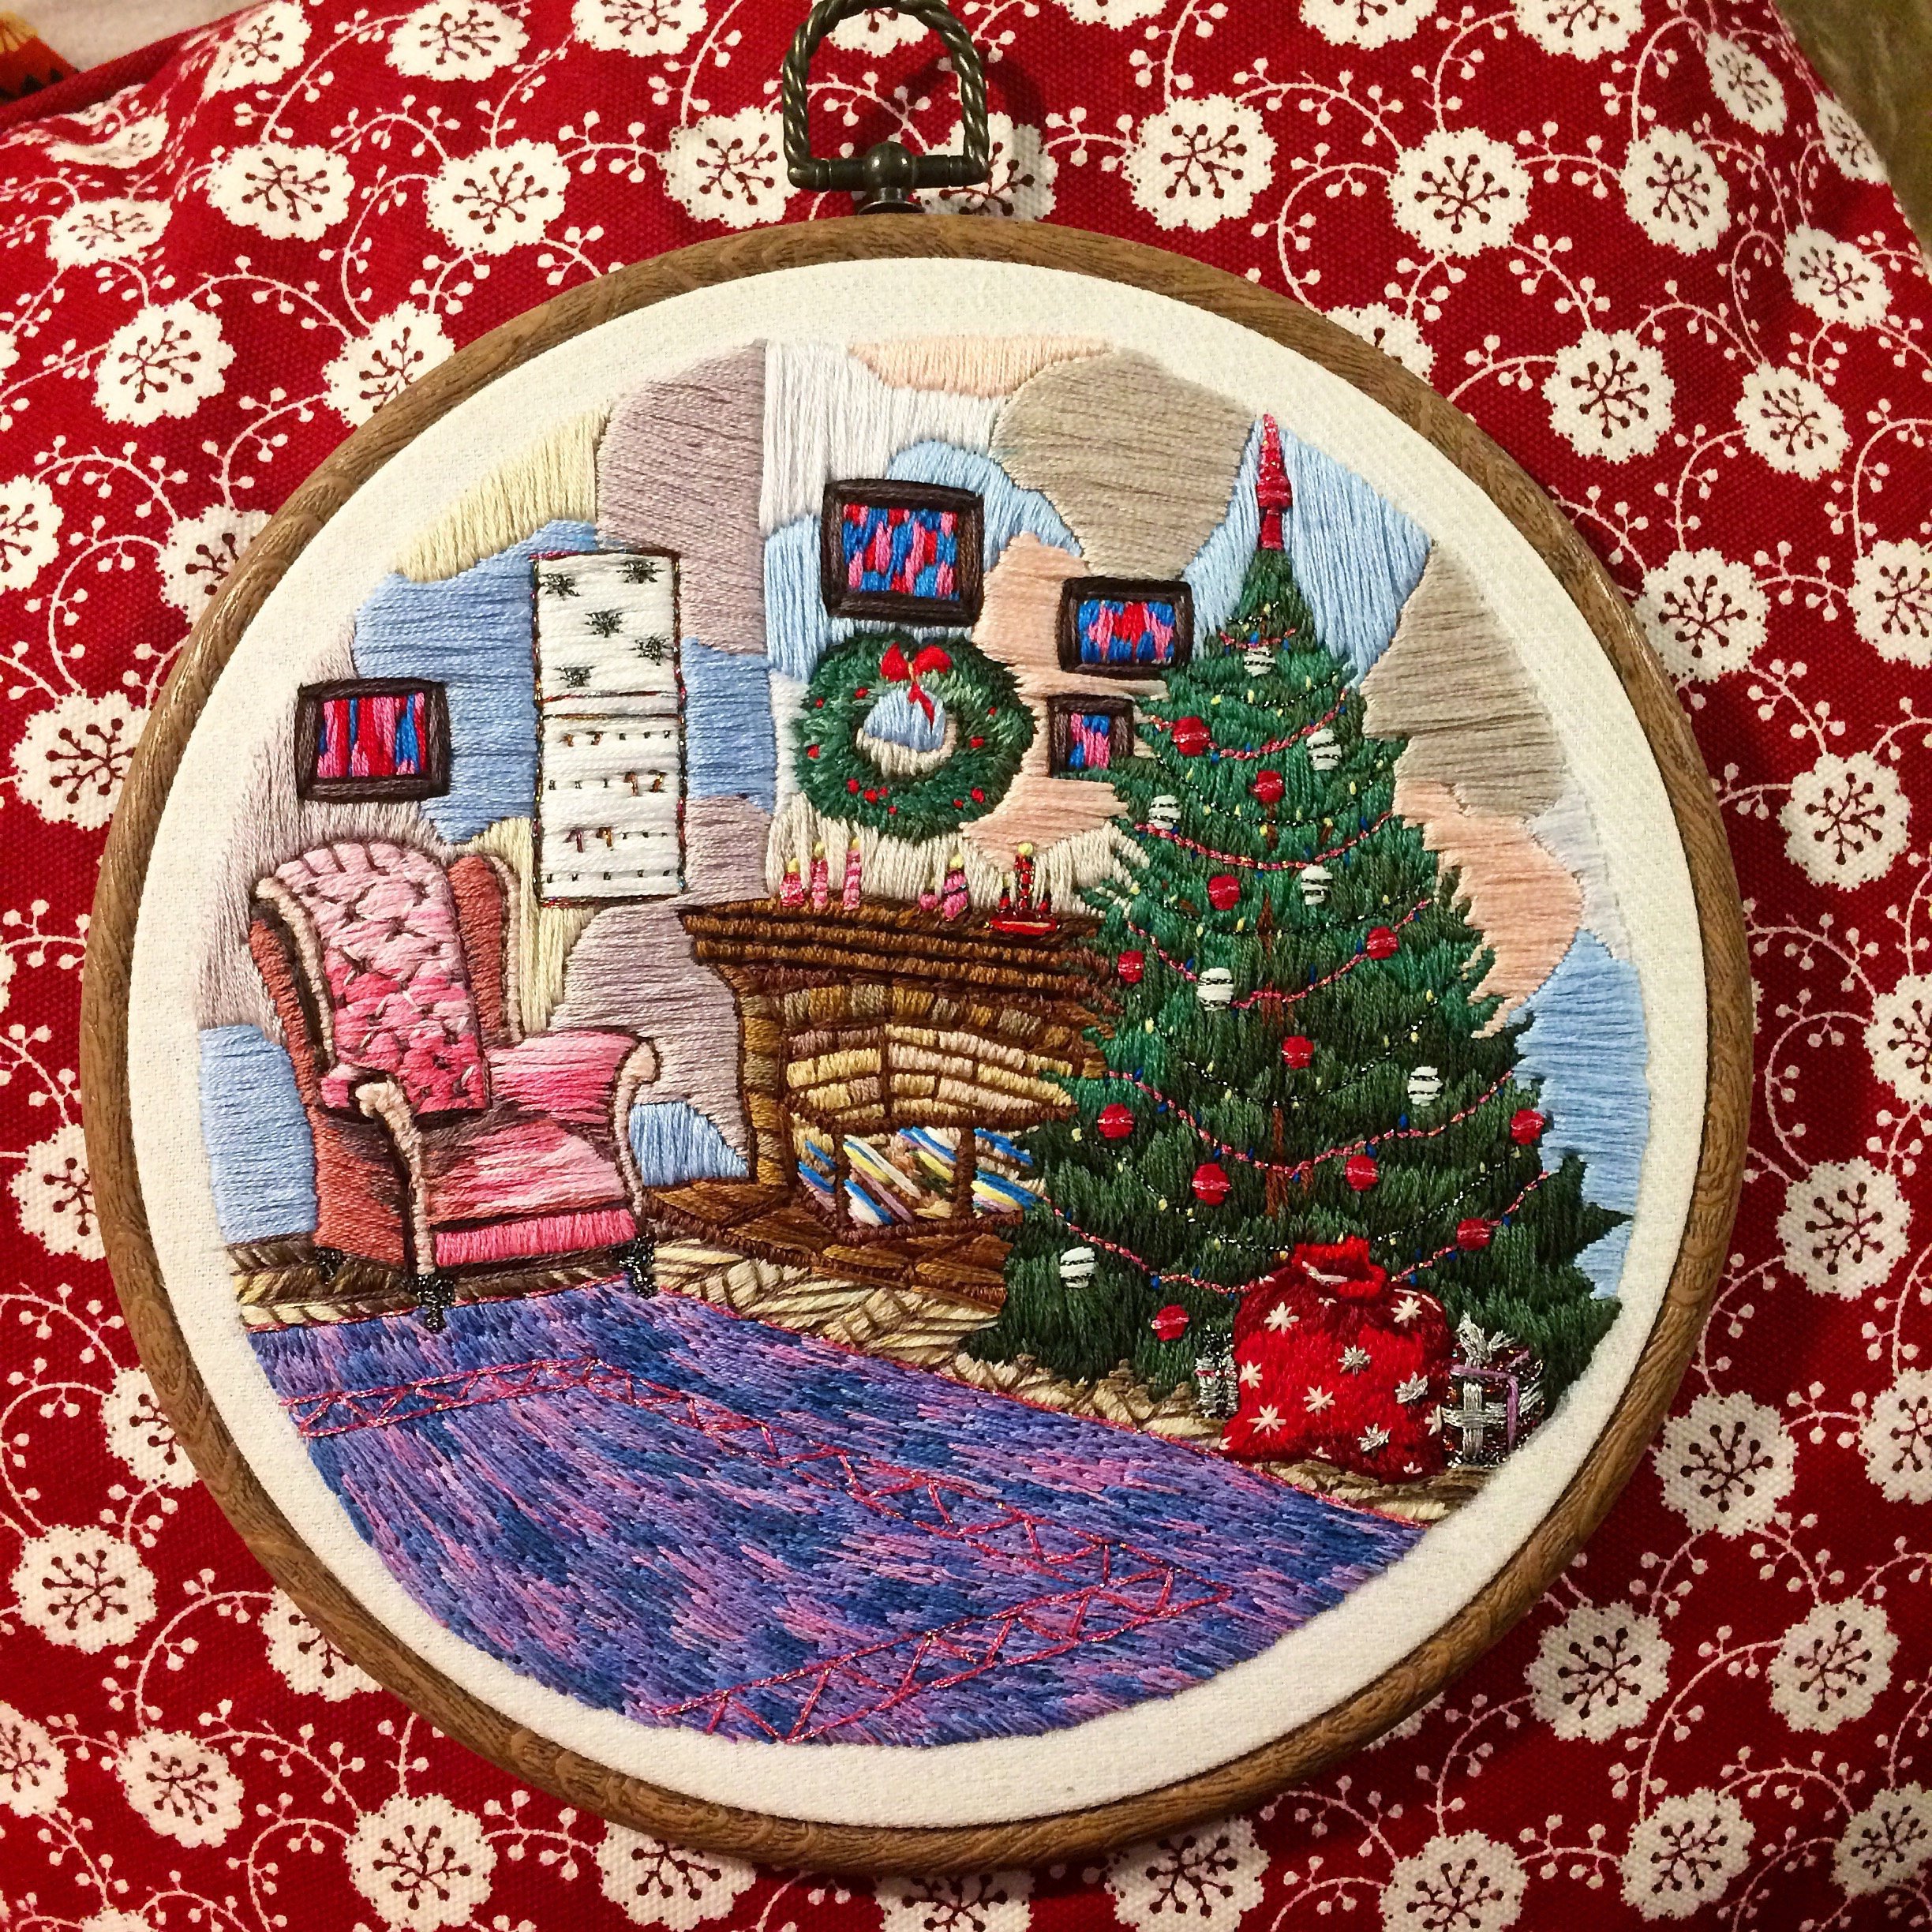 Home-inspired Embroidery Design: Your Miniature Home On Thread